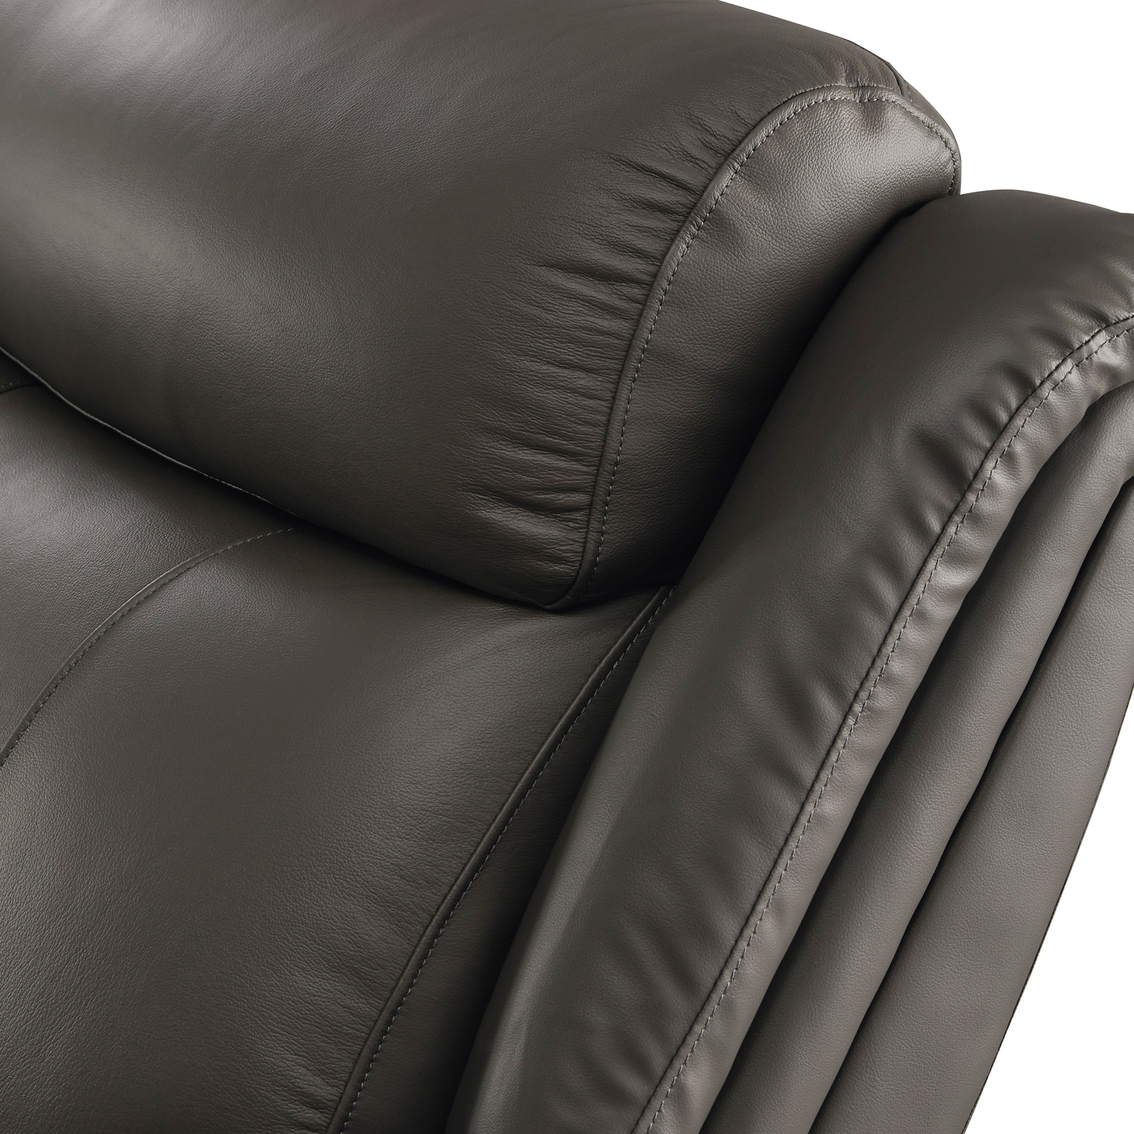 Signature Design by Ashley Chasewood Power Recliner - Image 6 of 9